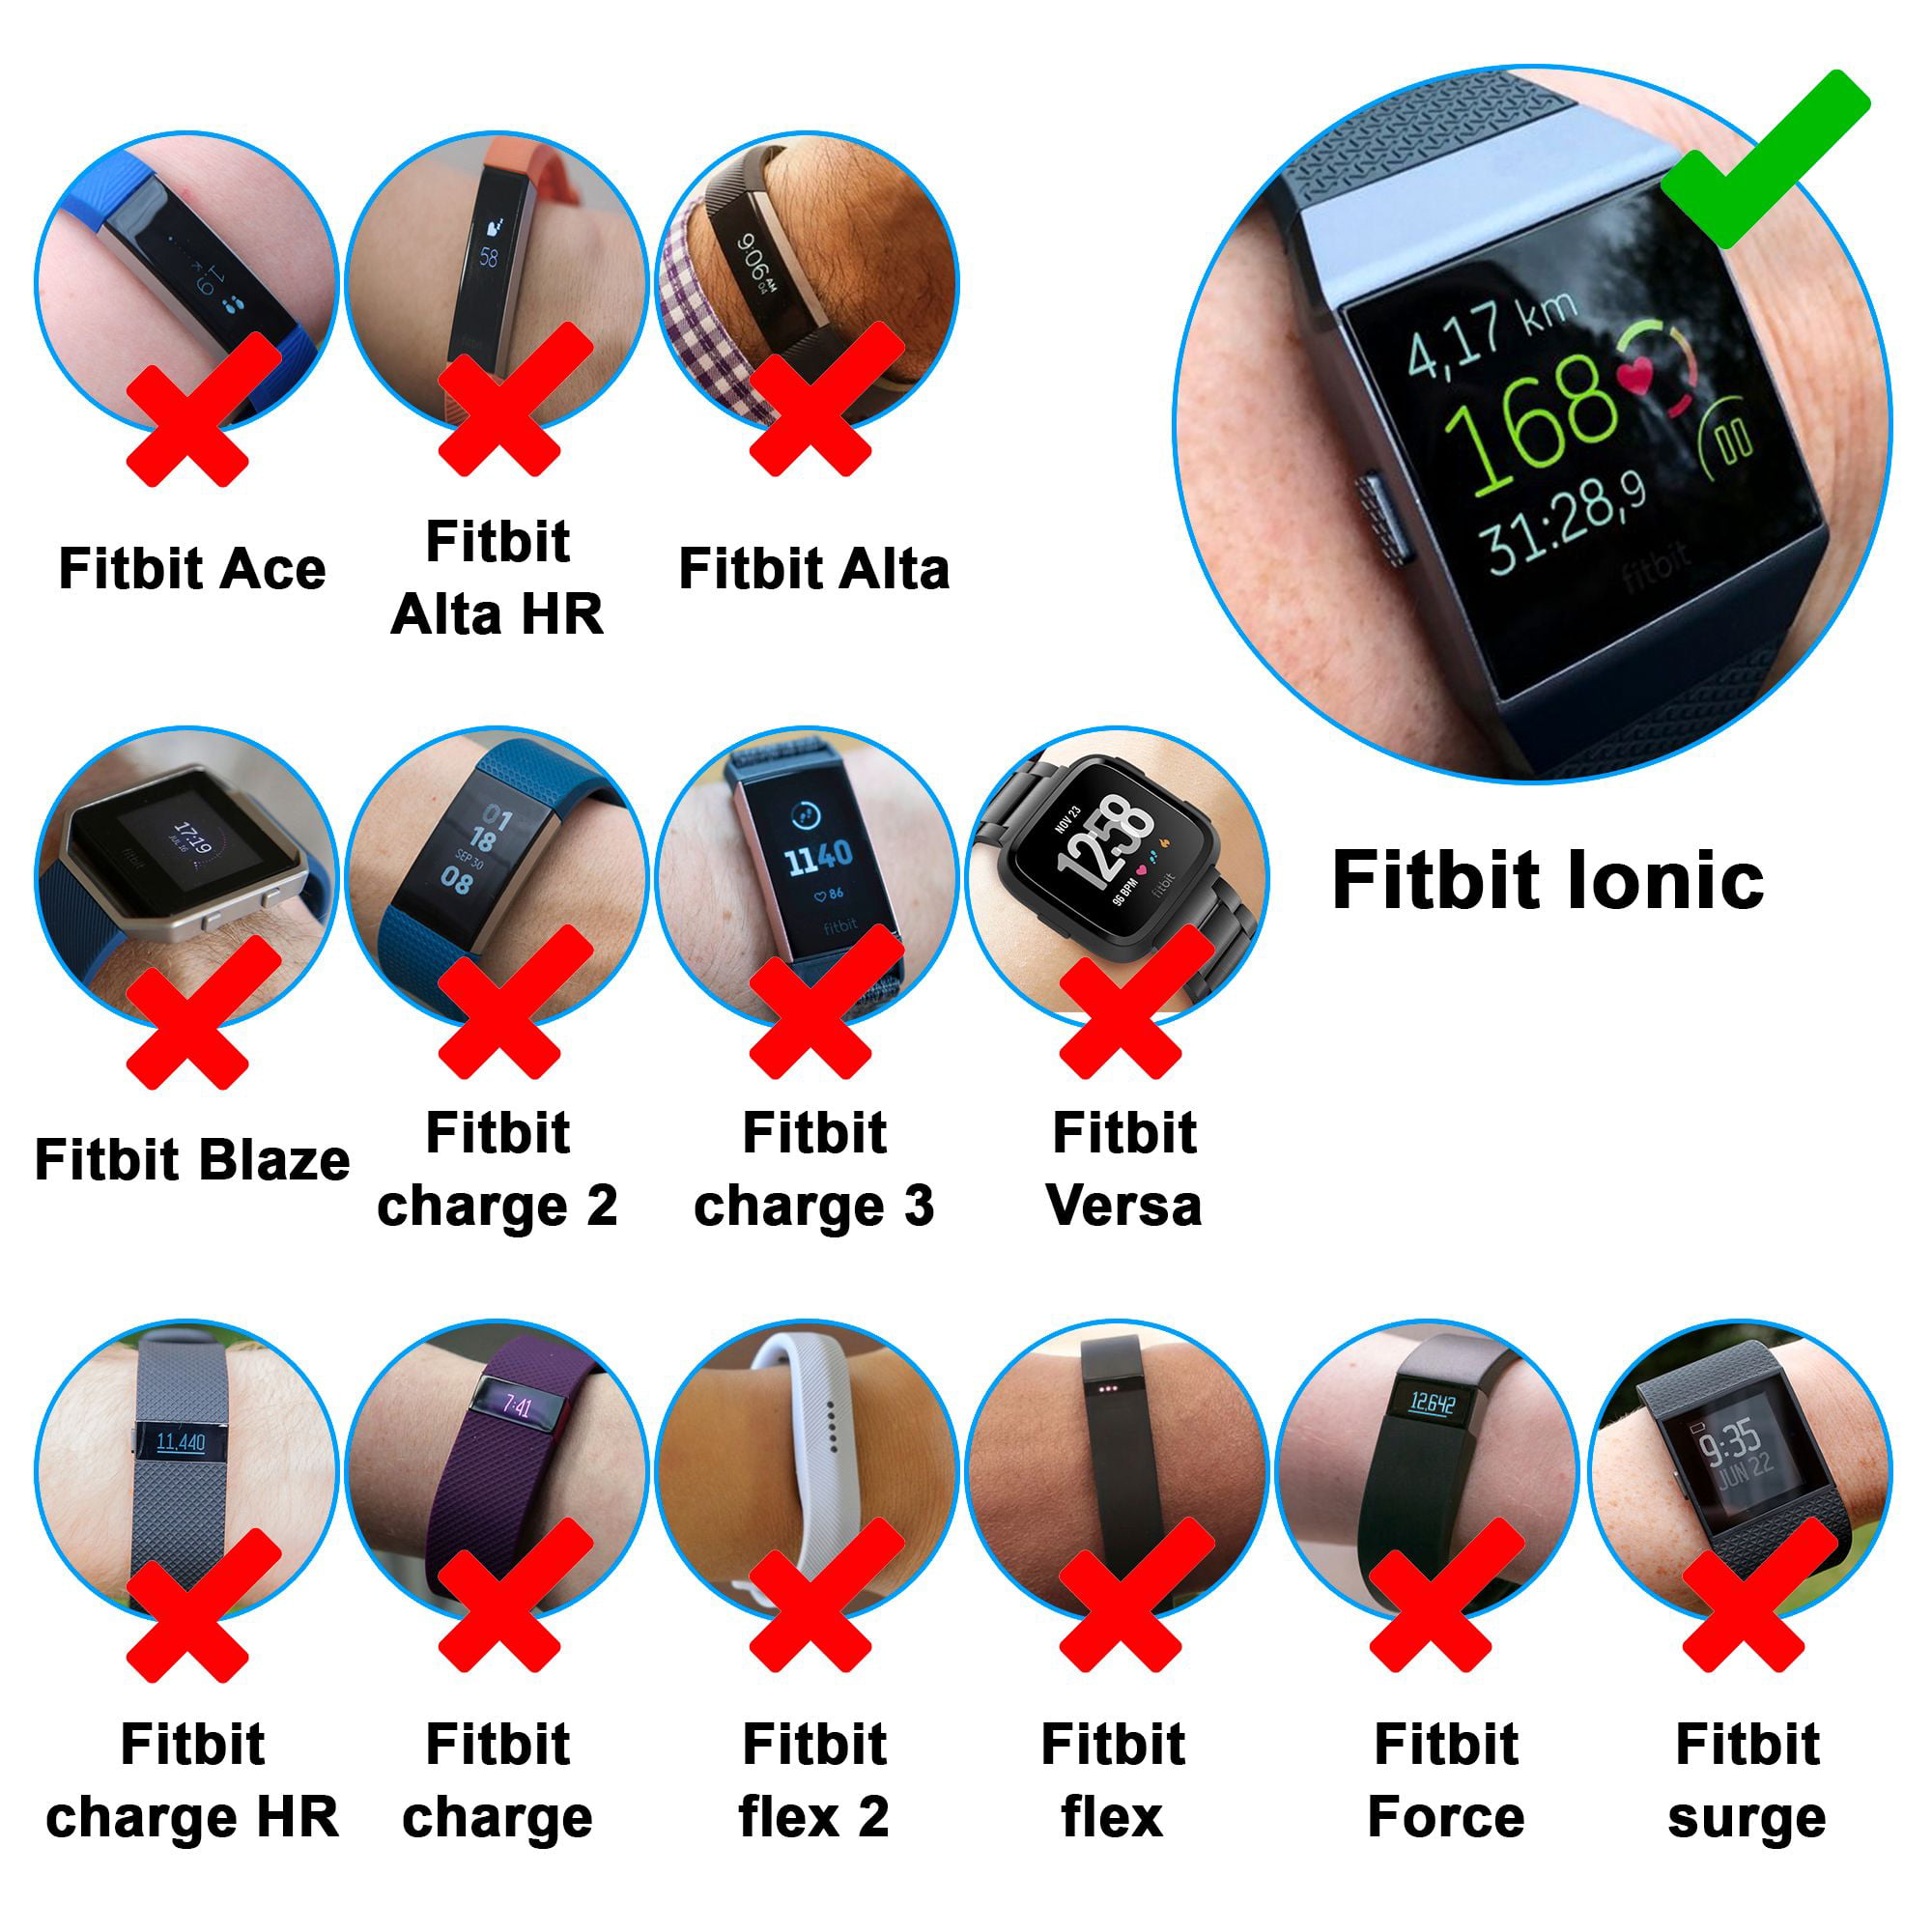 Fitbit Ionic charger by Insten 